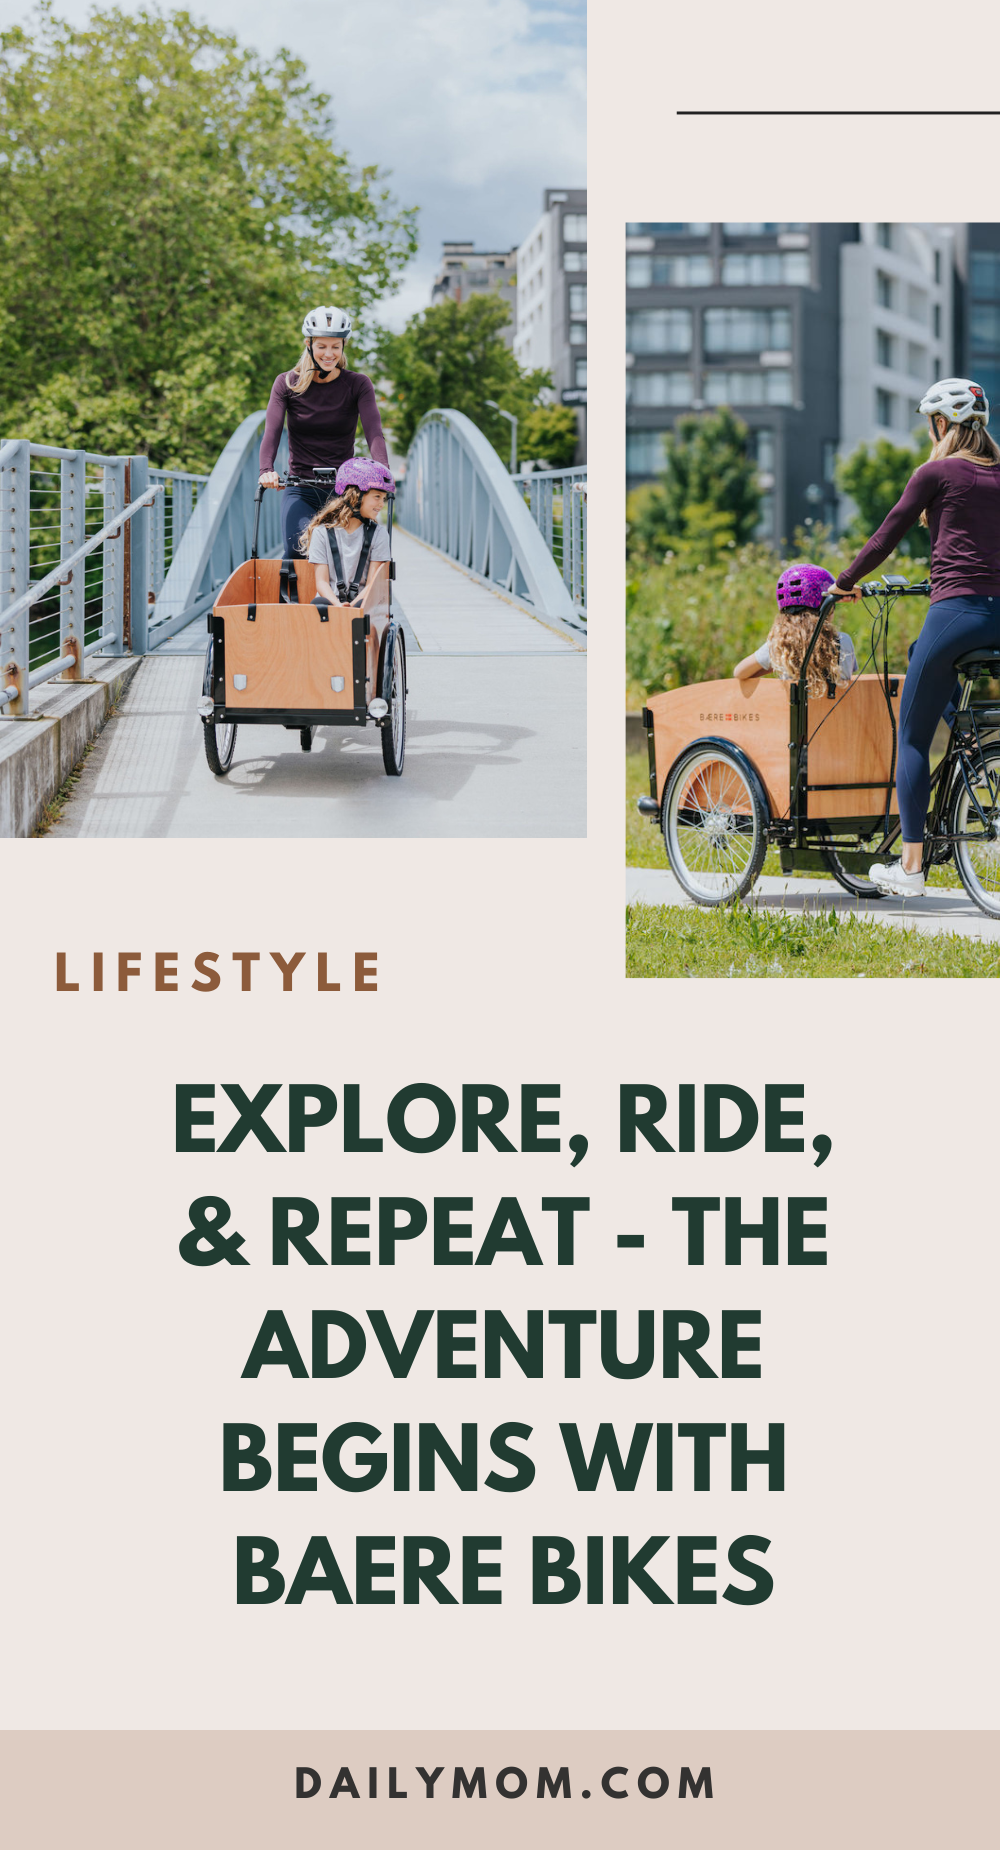 {2023} Going “Off-Road”: Why Baere Bikes Are An Awesome Alternative To Cars